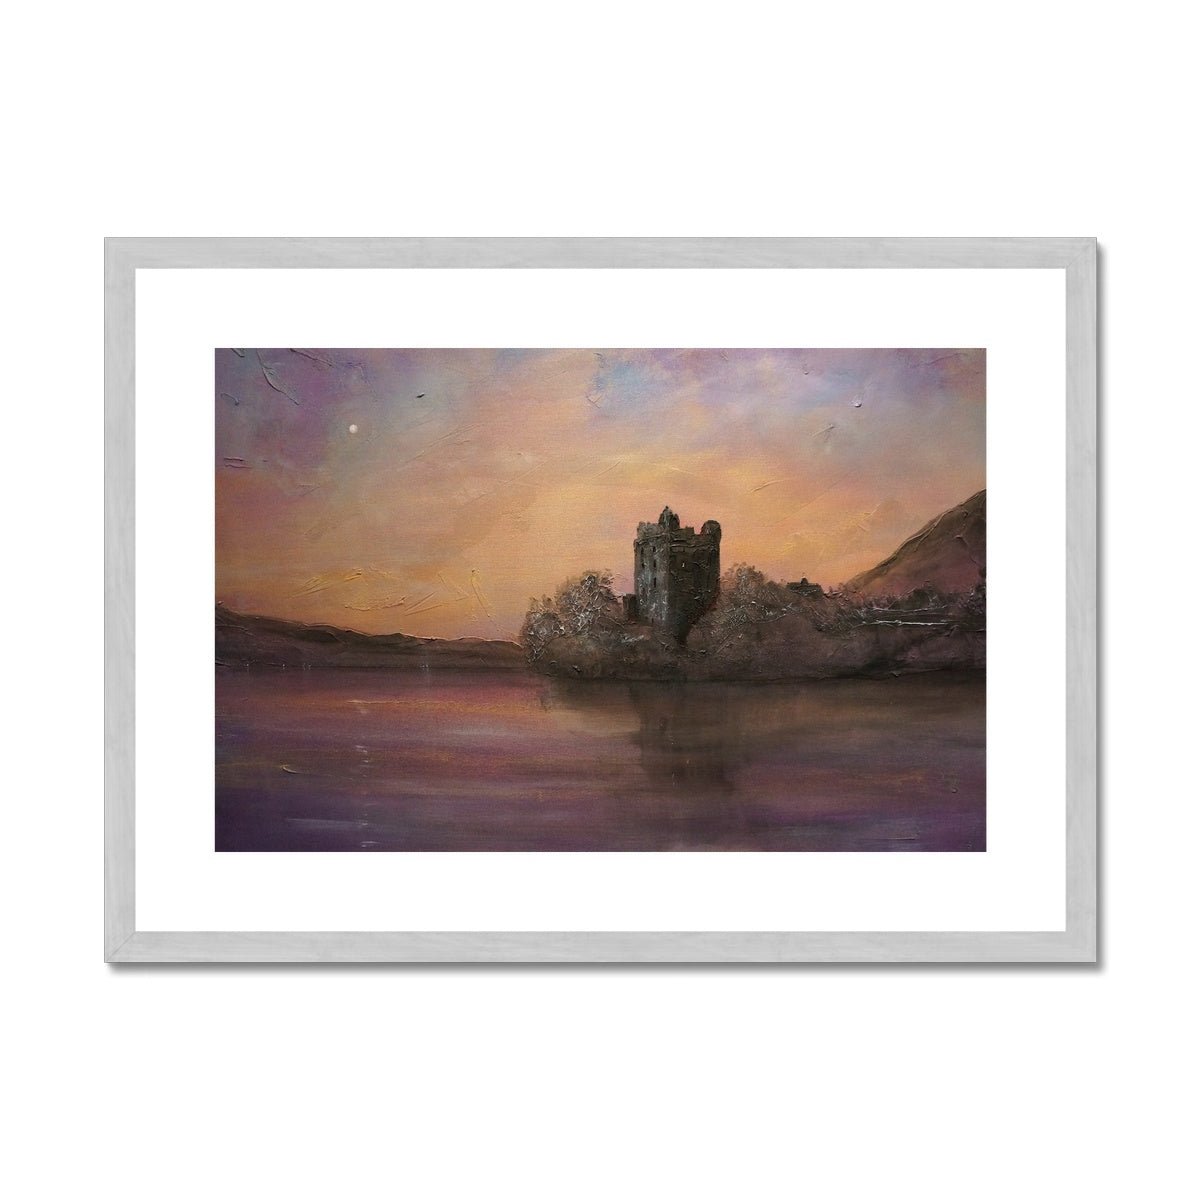 Urquhart Castle Moonlight Painting | Antique Framed & Mounted Prints From Scotland-Antique Framed & Mounted Prints-Historic & Iconic Scotland Art Gallery-A2 Landscape-Silver Frame-Paintings, Prints, Homeware, Art Gifts From Scotland By Scottish Artist Kevin Hunter